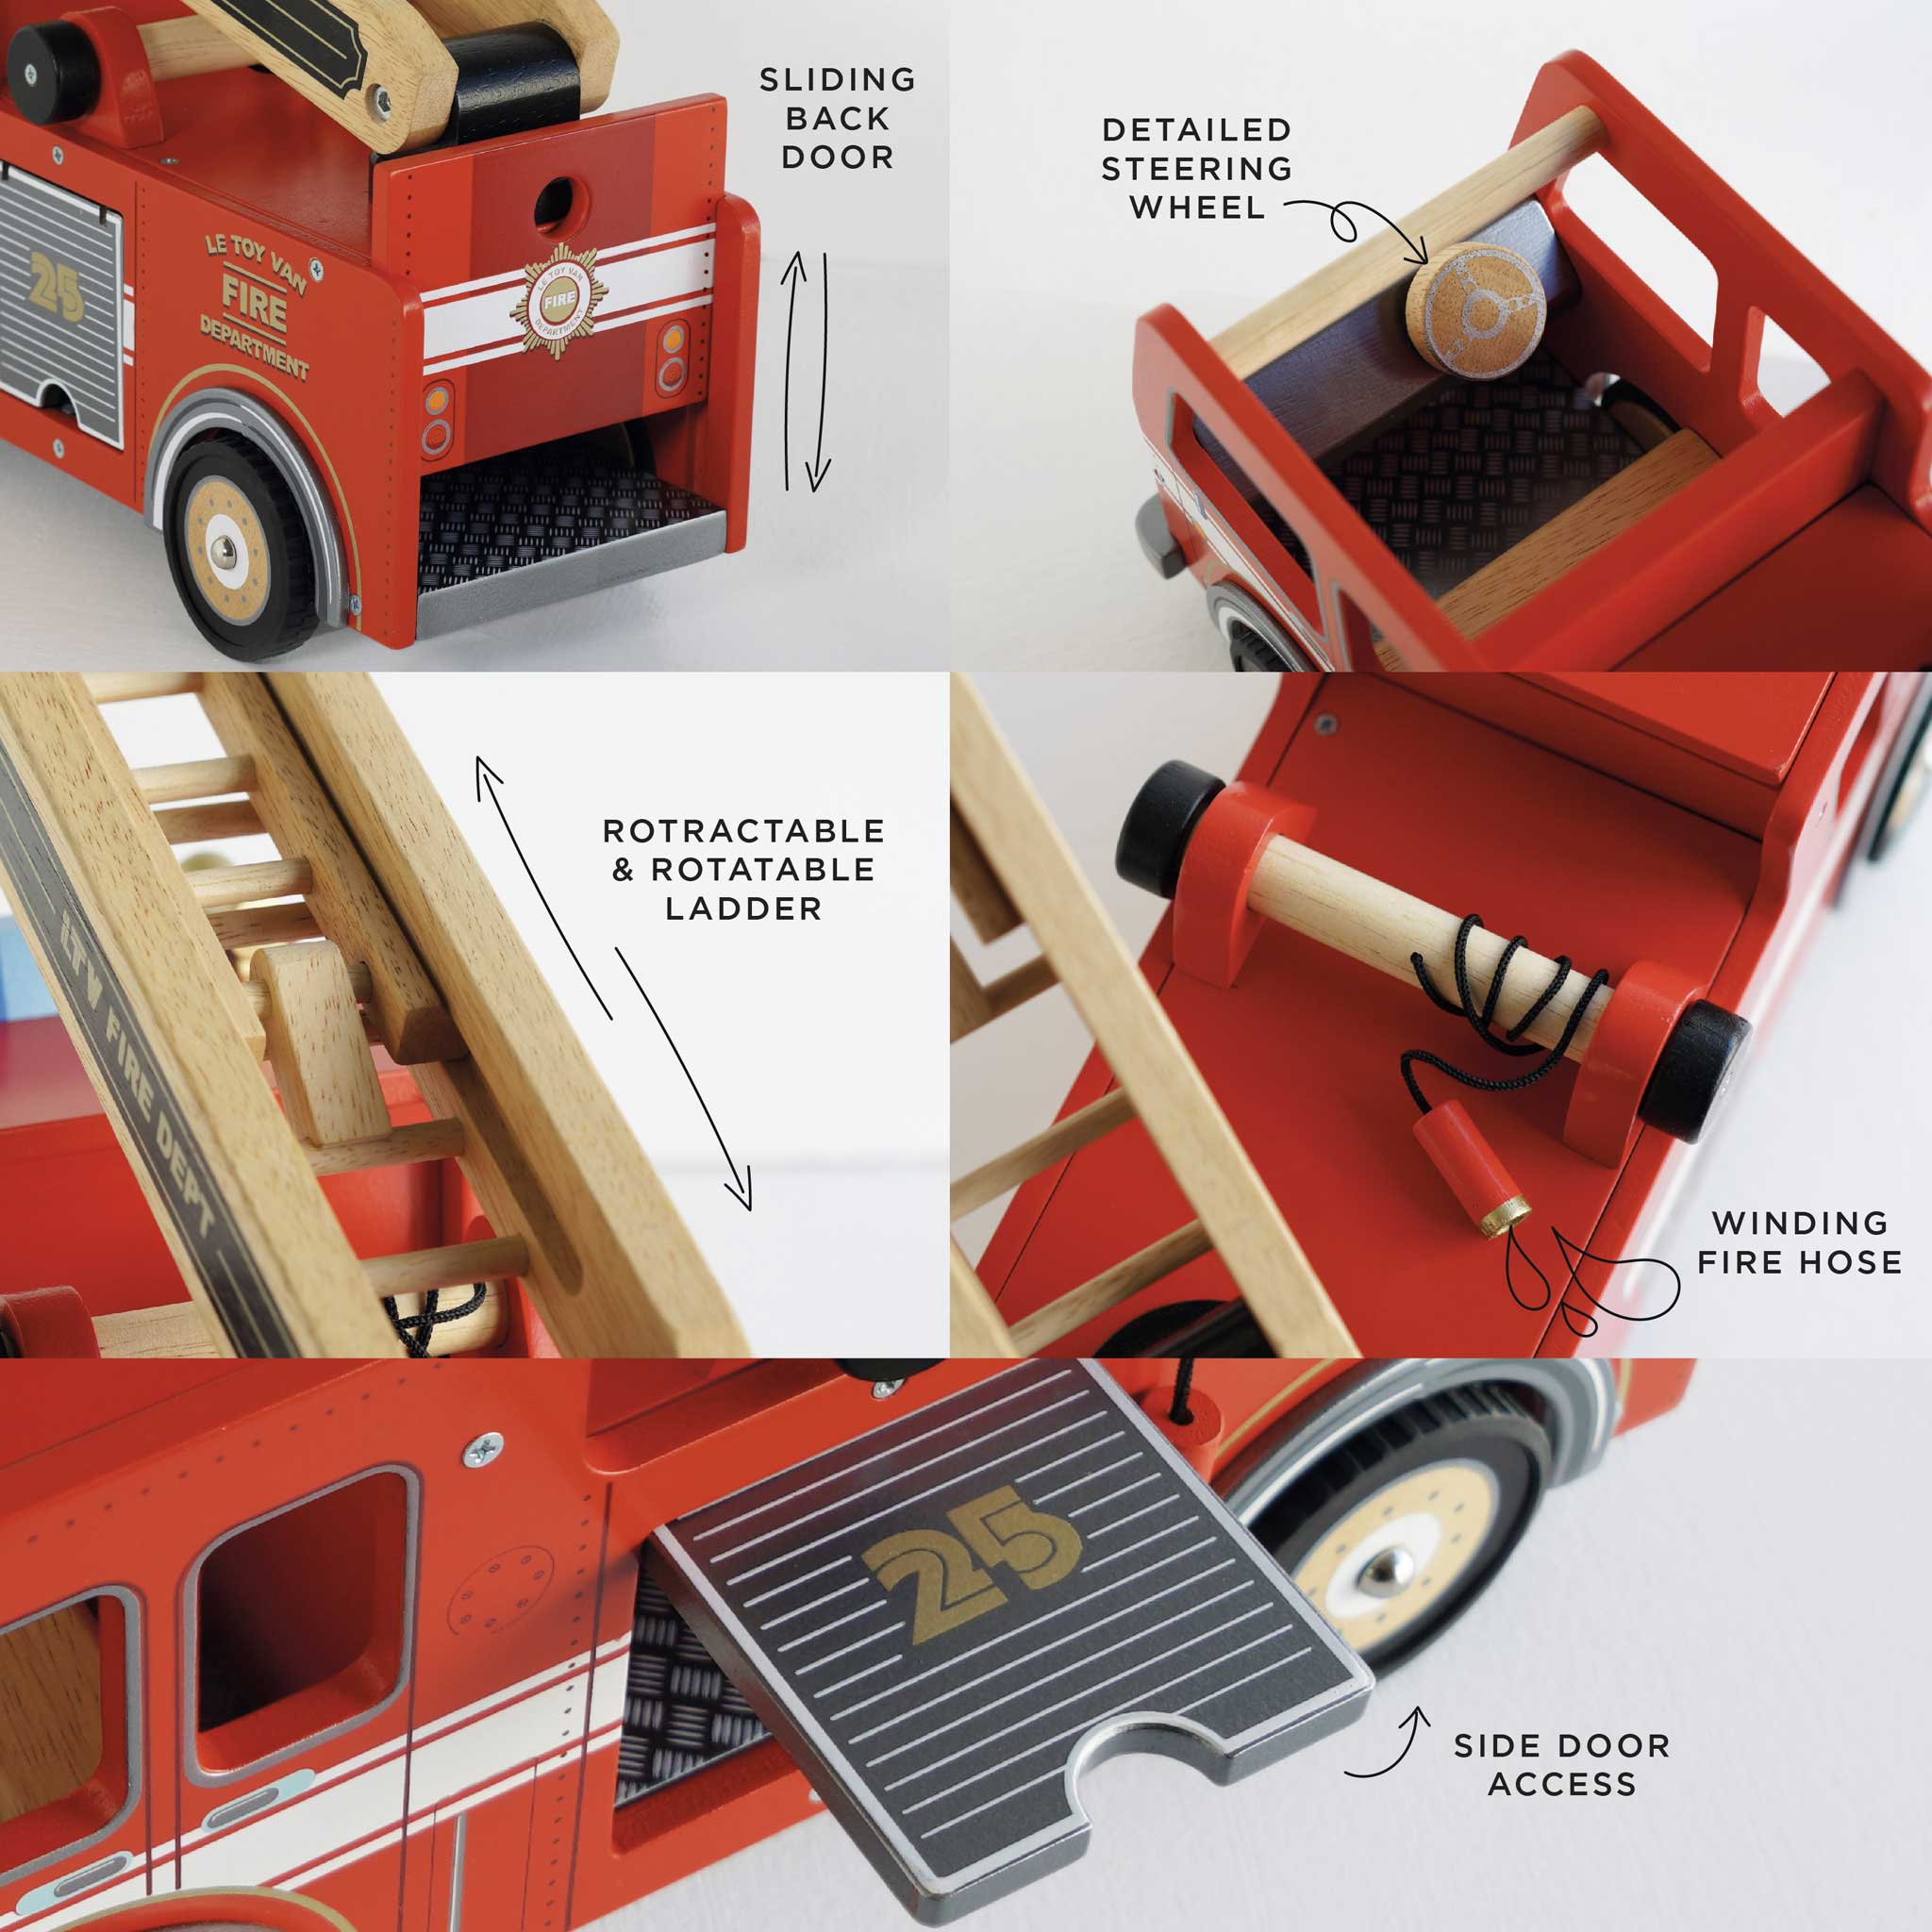 TV427-fire-engine-all-of-the-play-features-provided